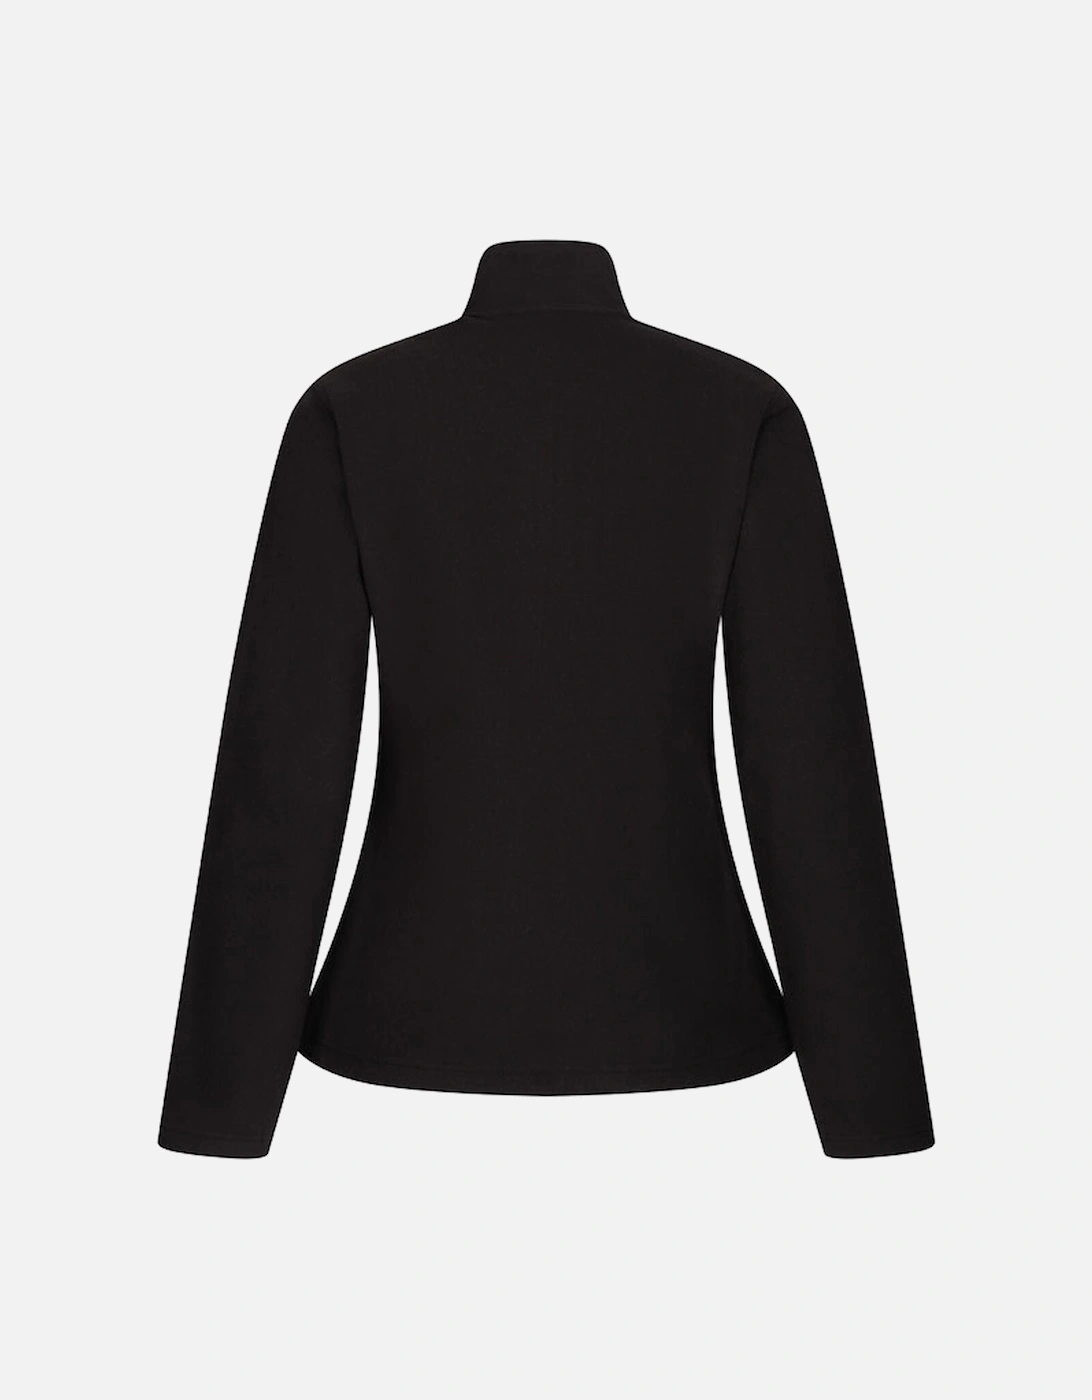 Womens Honestly Made Recycled Fleece Jacket